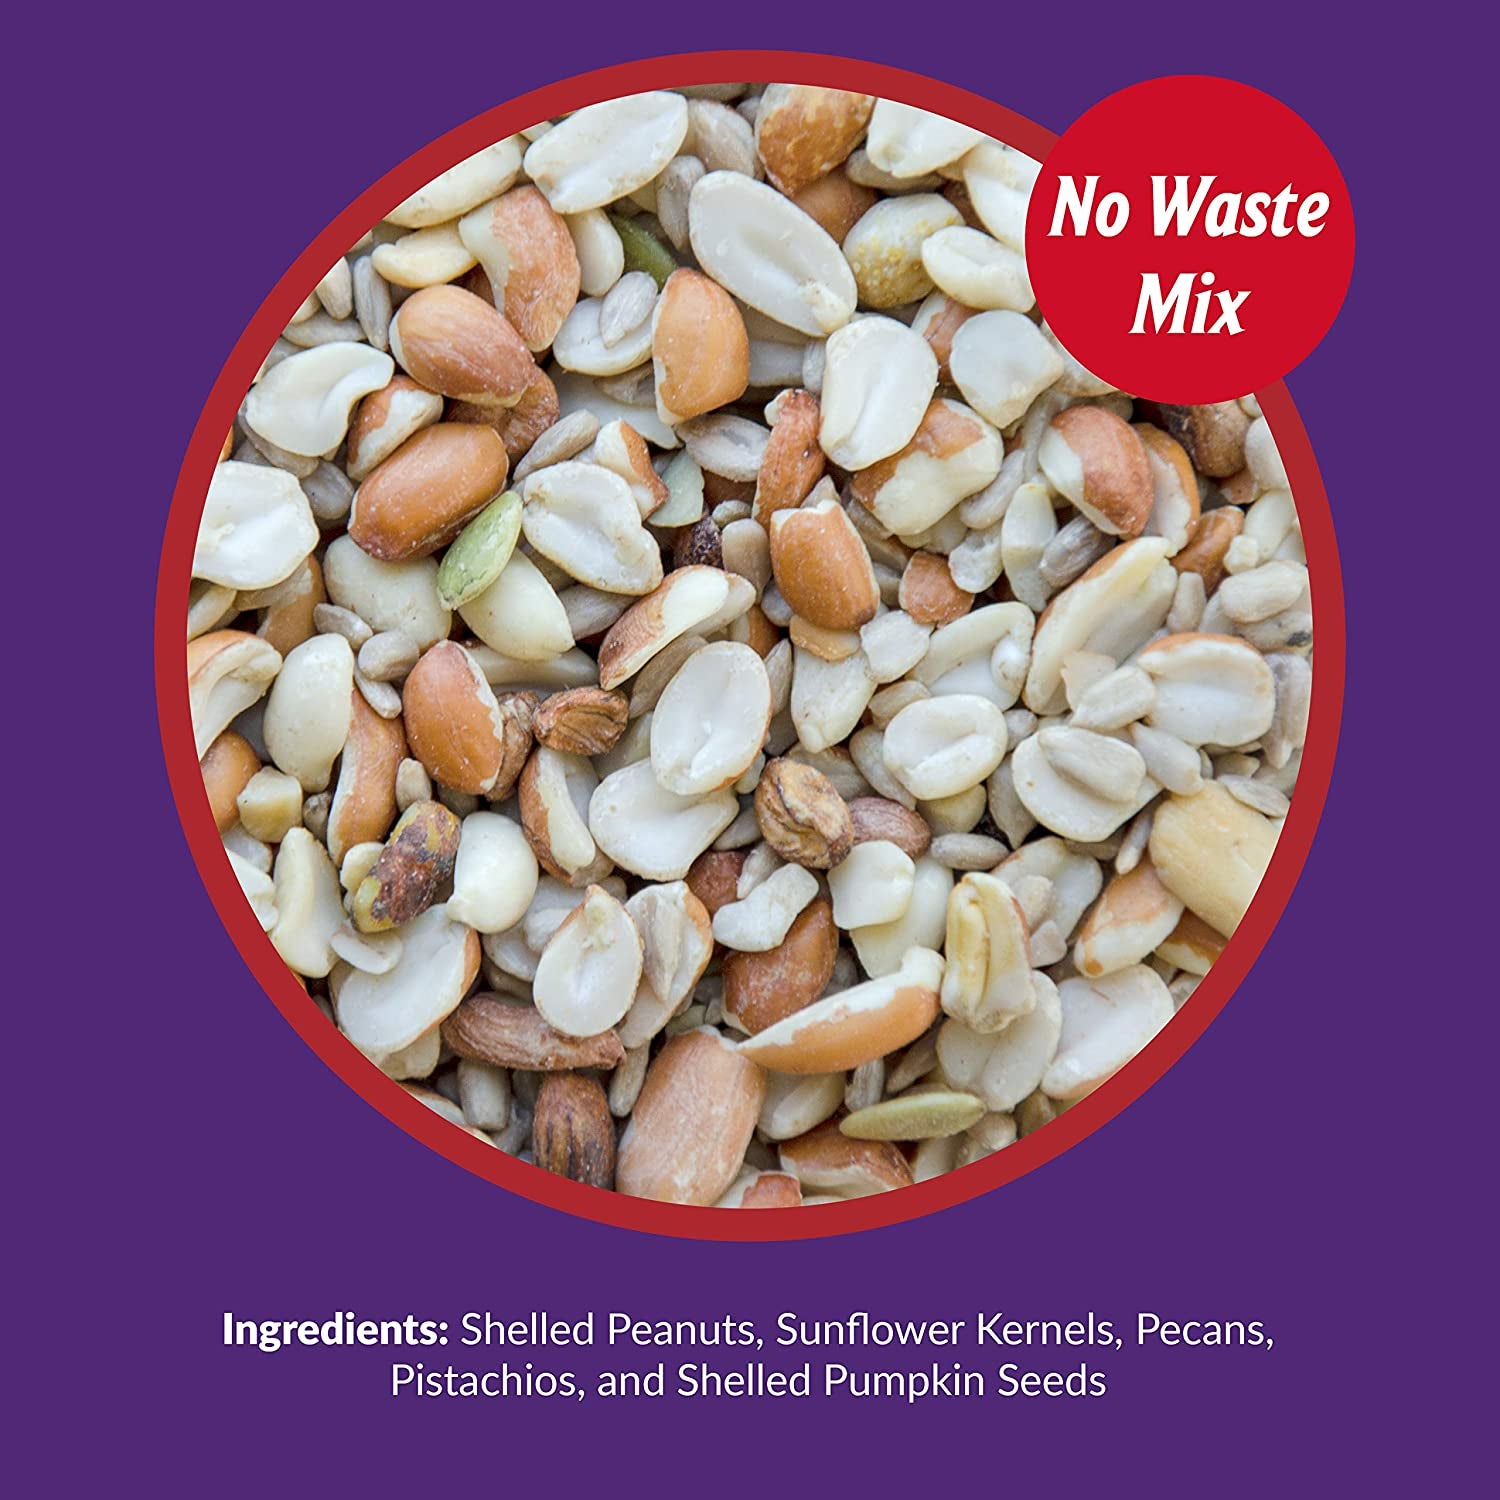 Fruit and Nut Wild Bird Seed, High Energy Wild Bird Food Mix, 20 Lb. Bag & Delite Wild Bird Seed, No Waste Bird Food Mix with Shell-Free Nuts and Seeds, 20 Lb. Bag